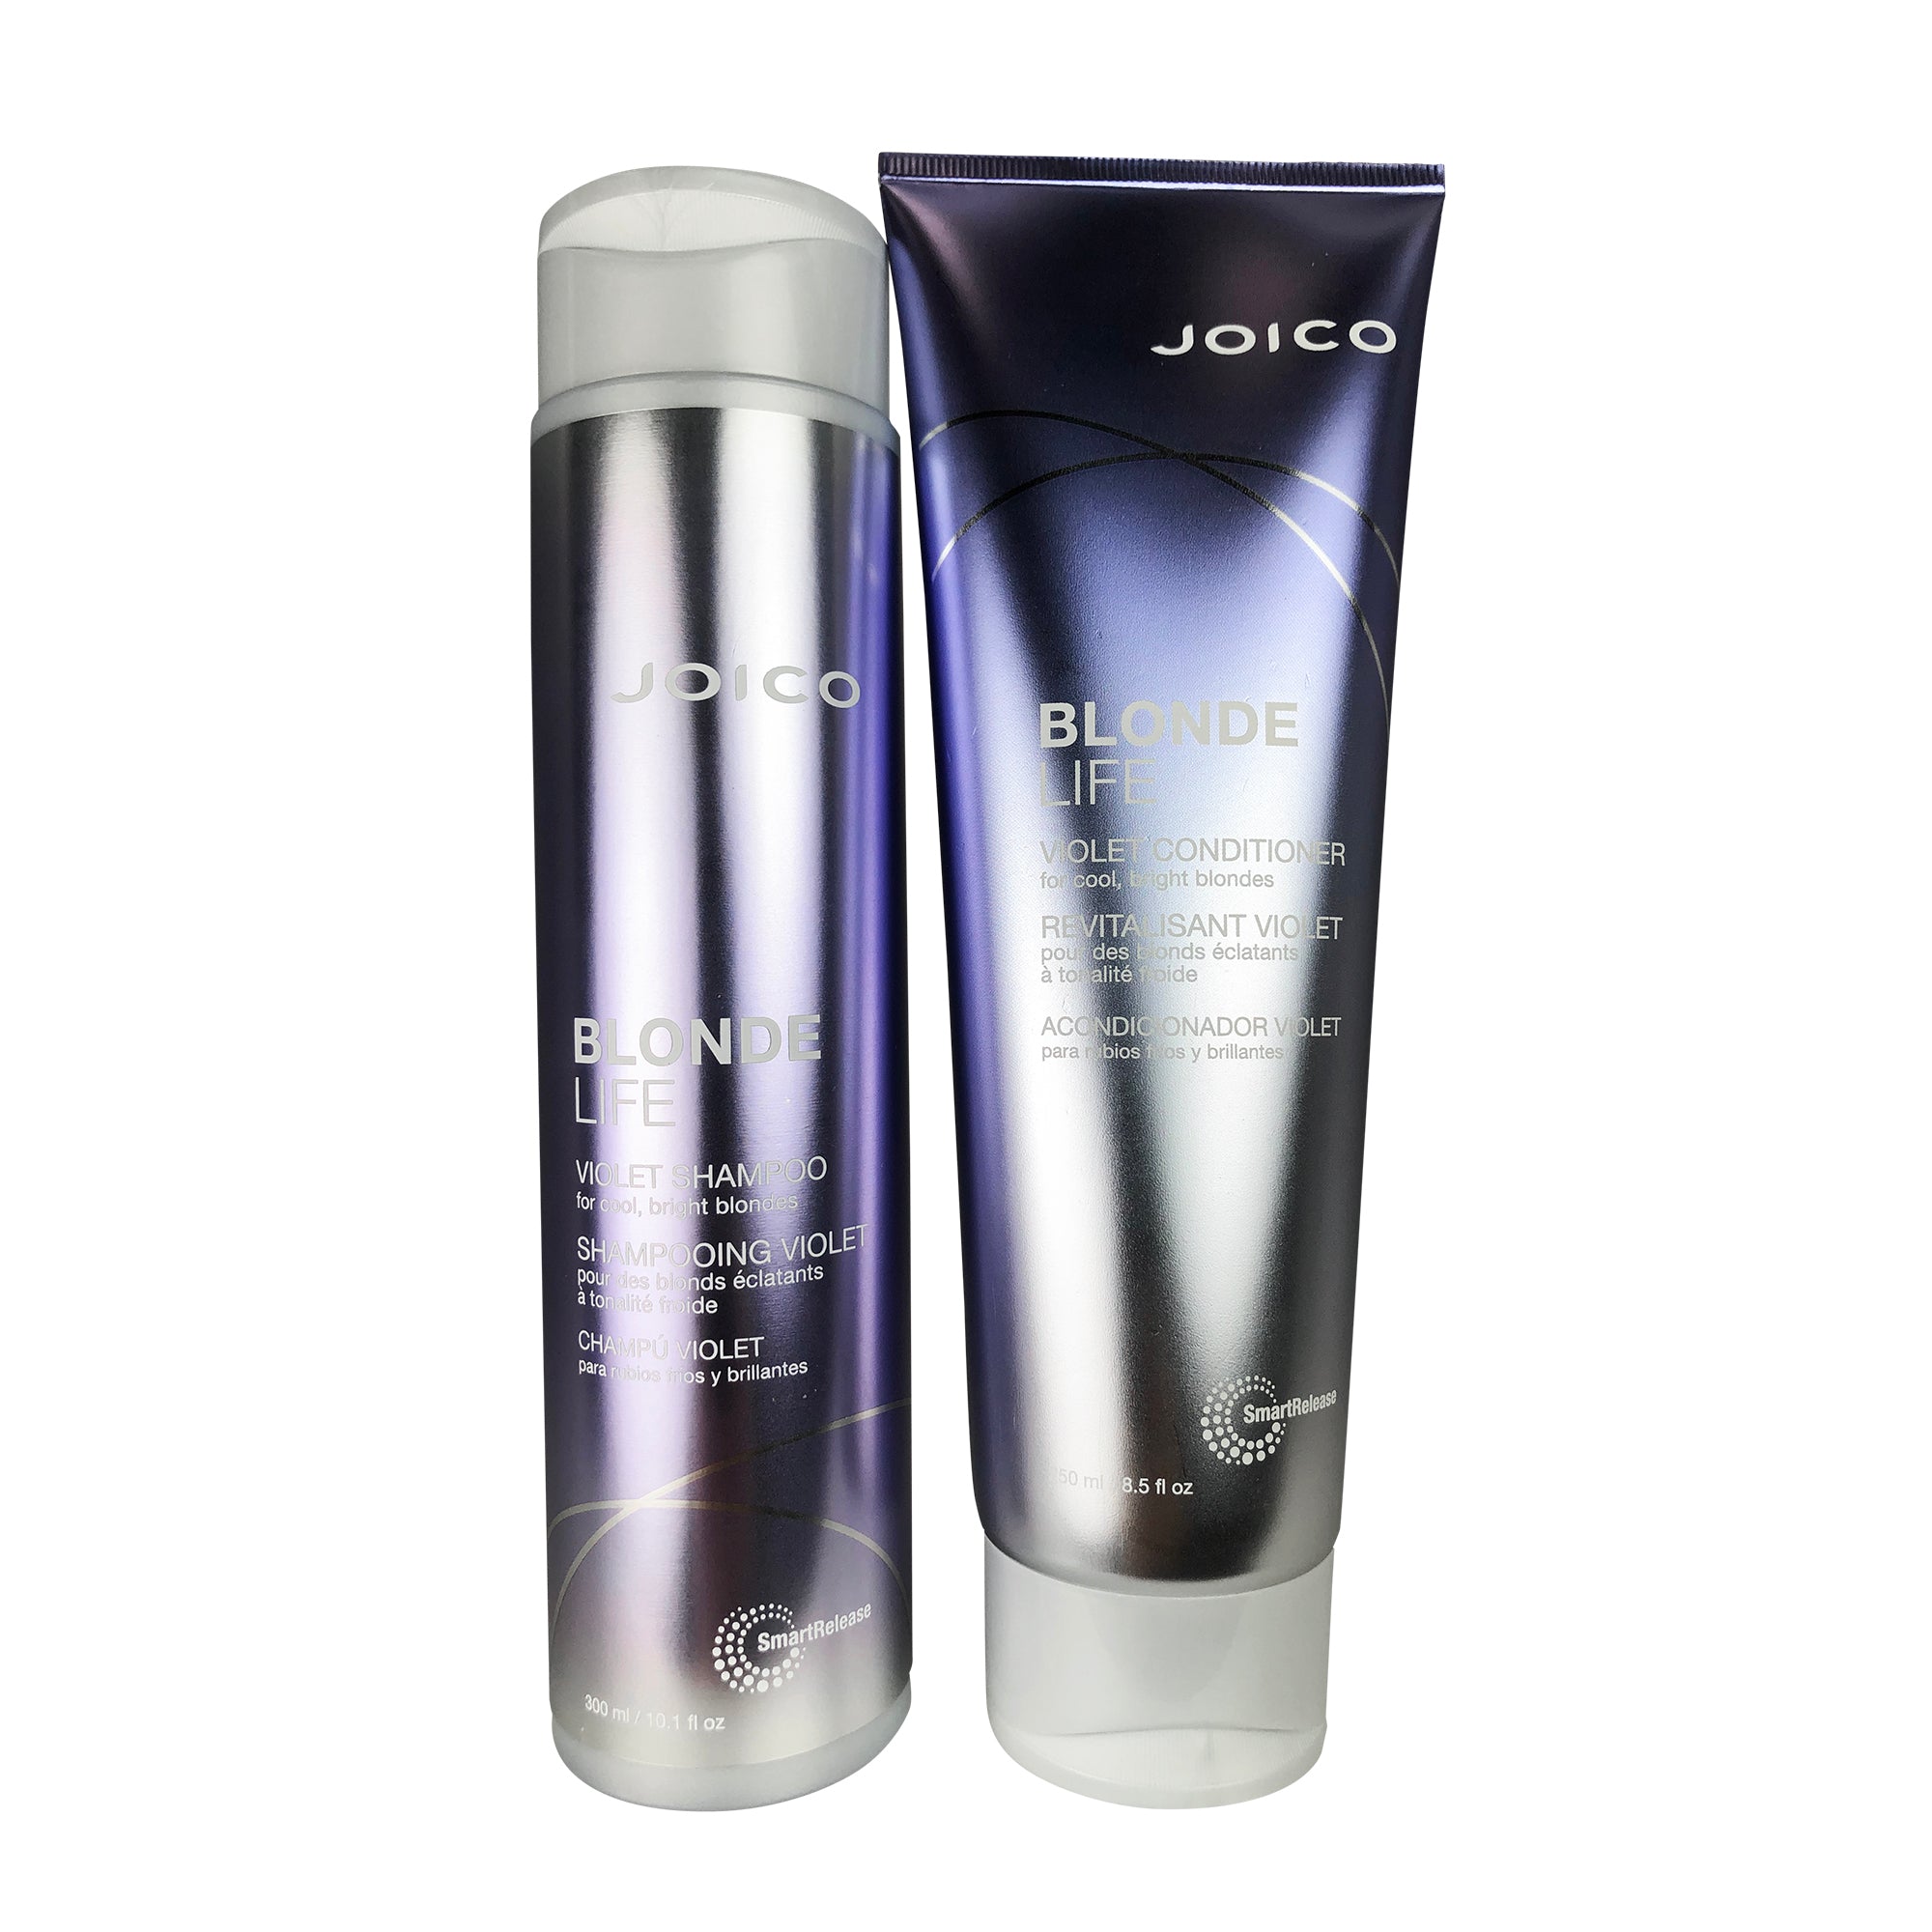 JOICO Blonde Life Violet Shampoo 10.1 oz and Conditioner 8.5 oz DUO for Cool Bright Blondes